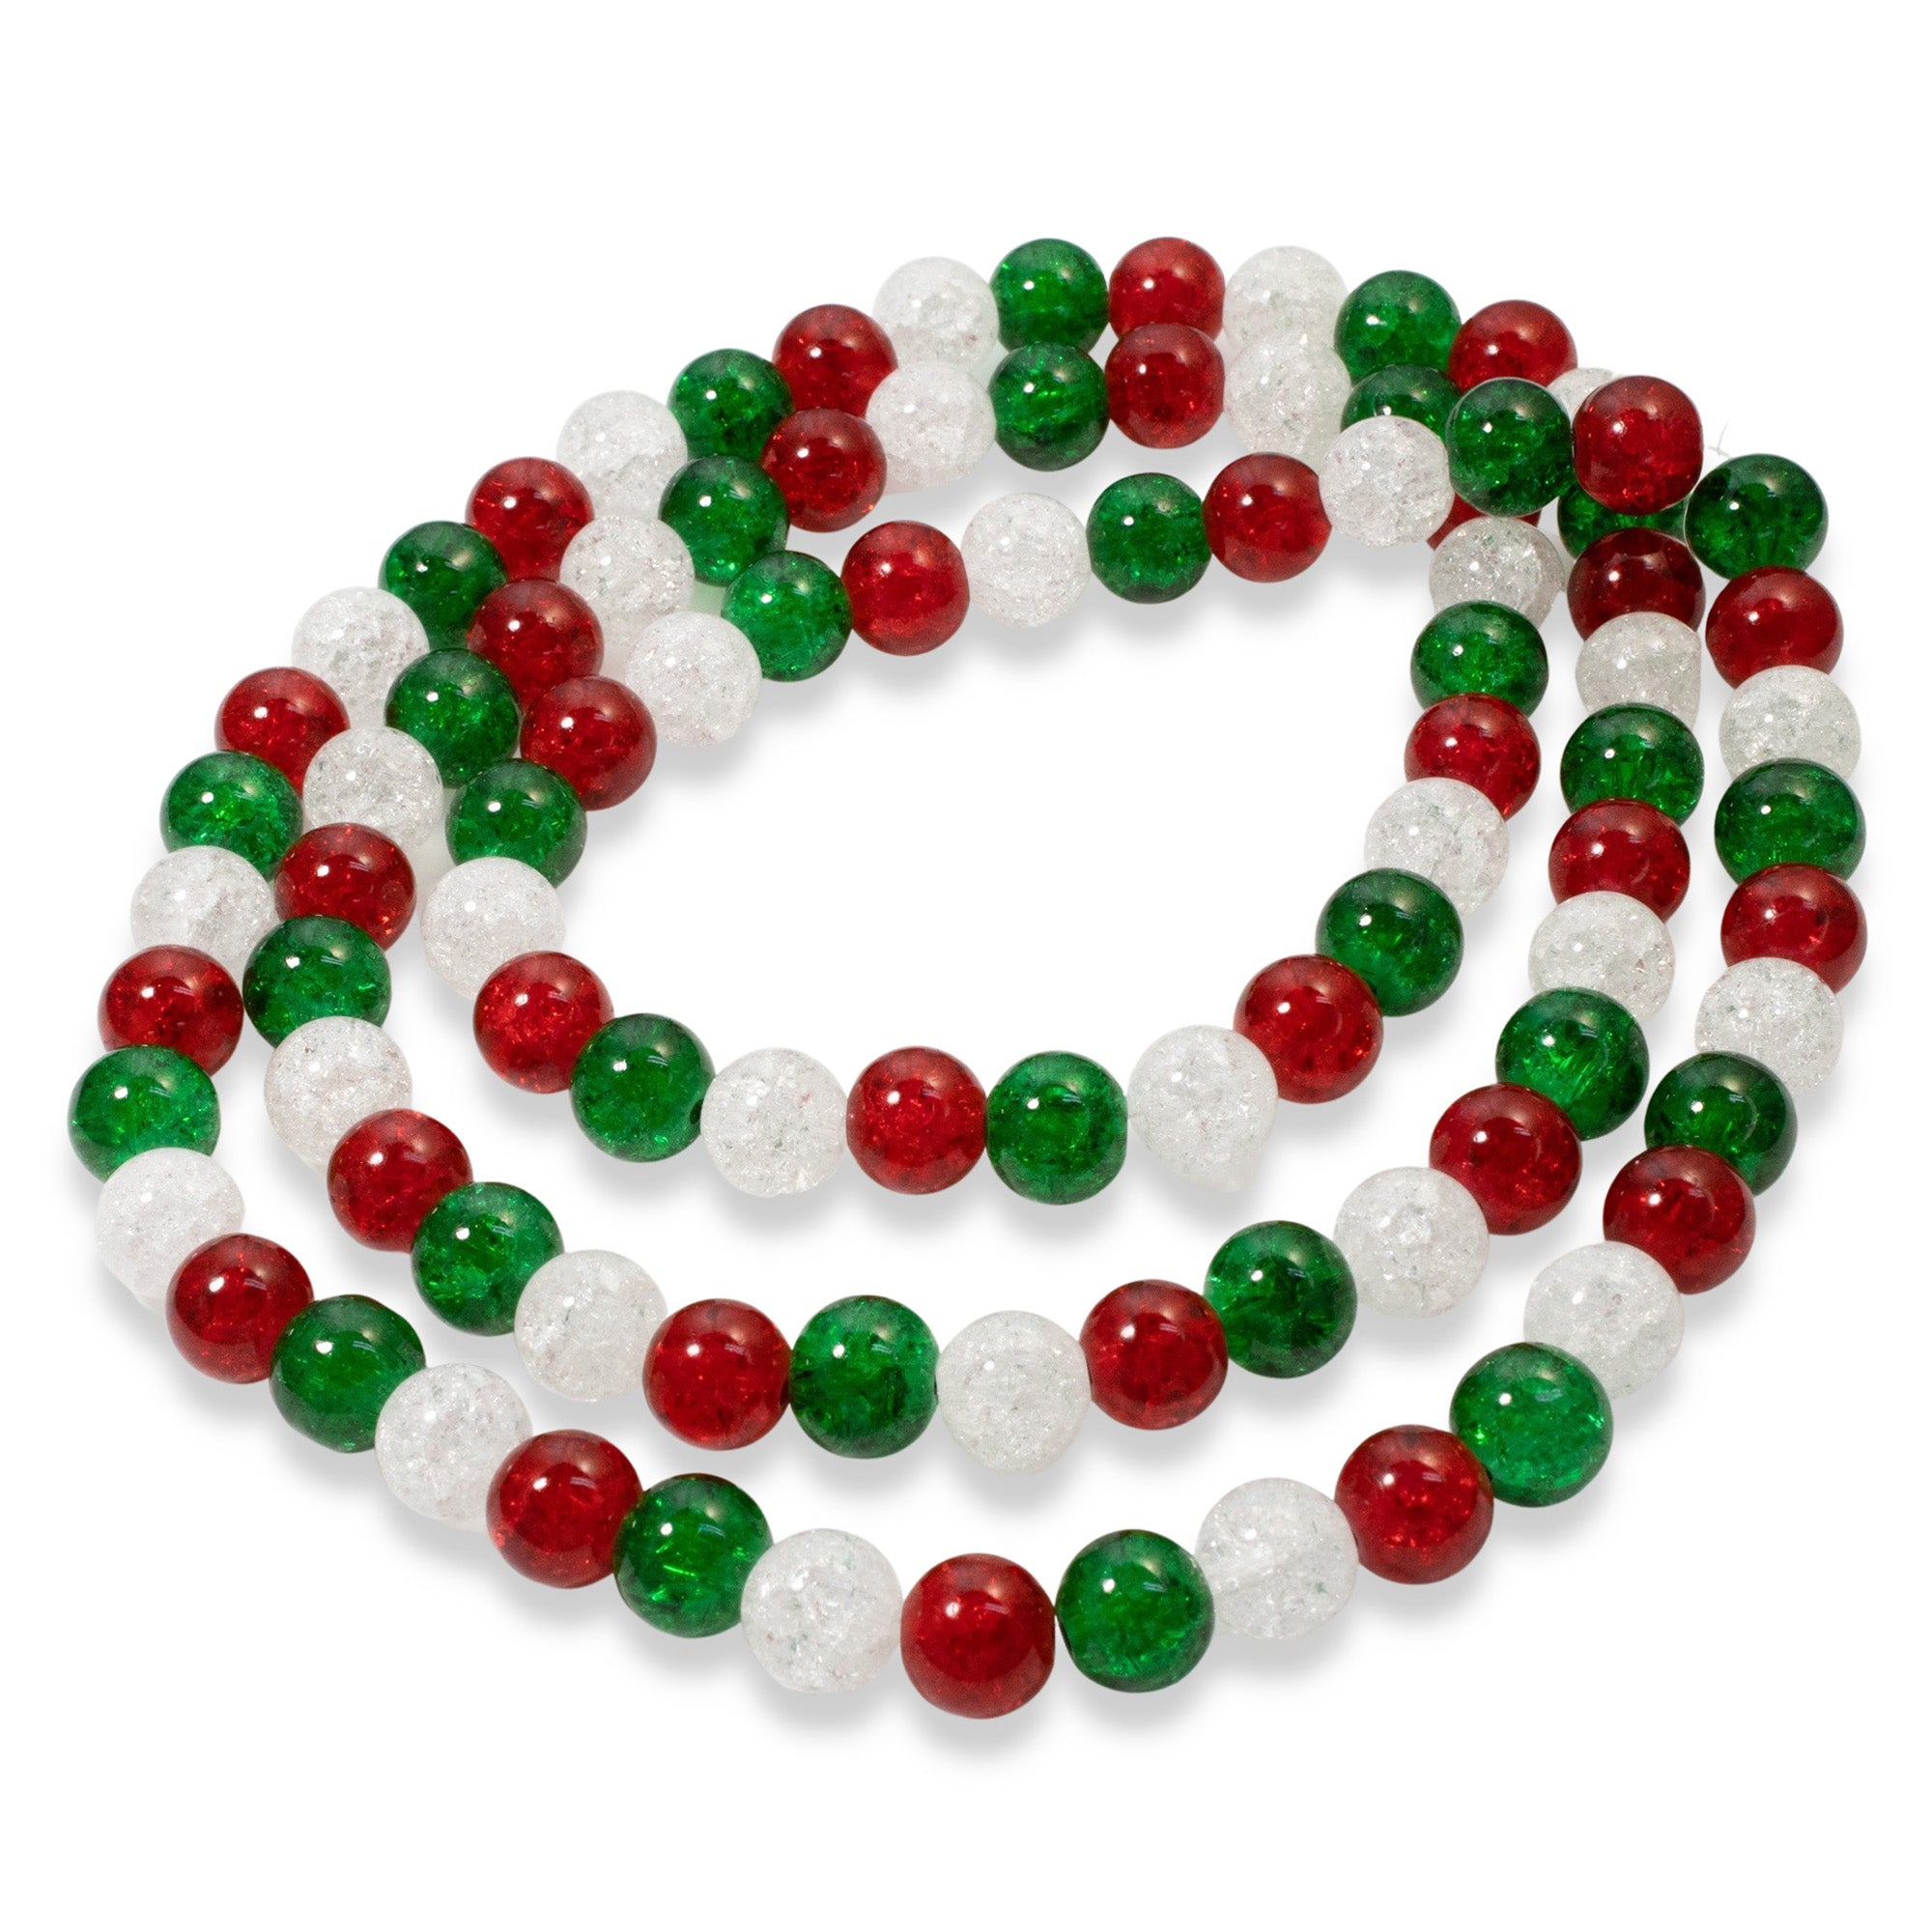 Bulk Lot Glass Beads for Jewelry Making Christmas Red Green Clear 10 lb